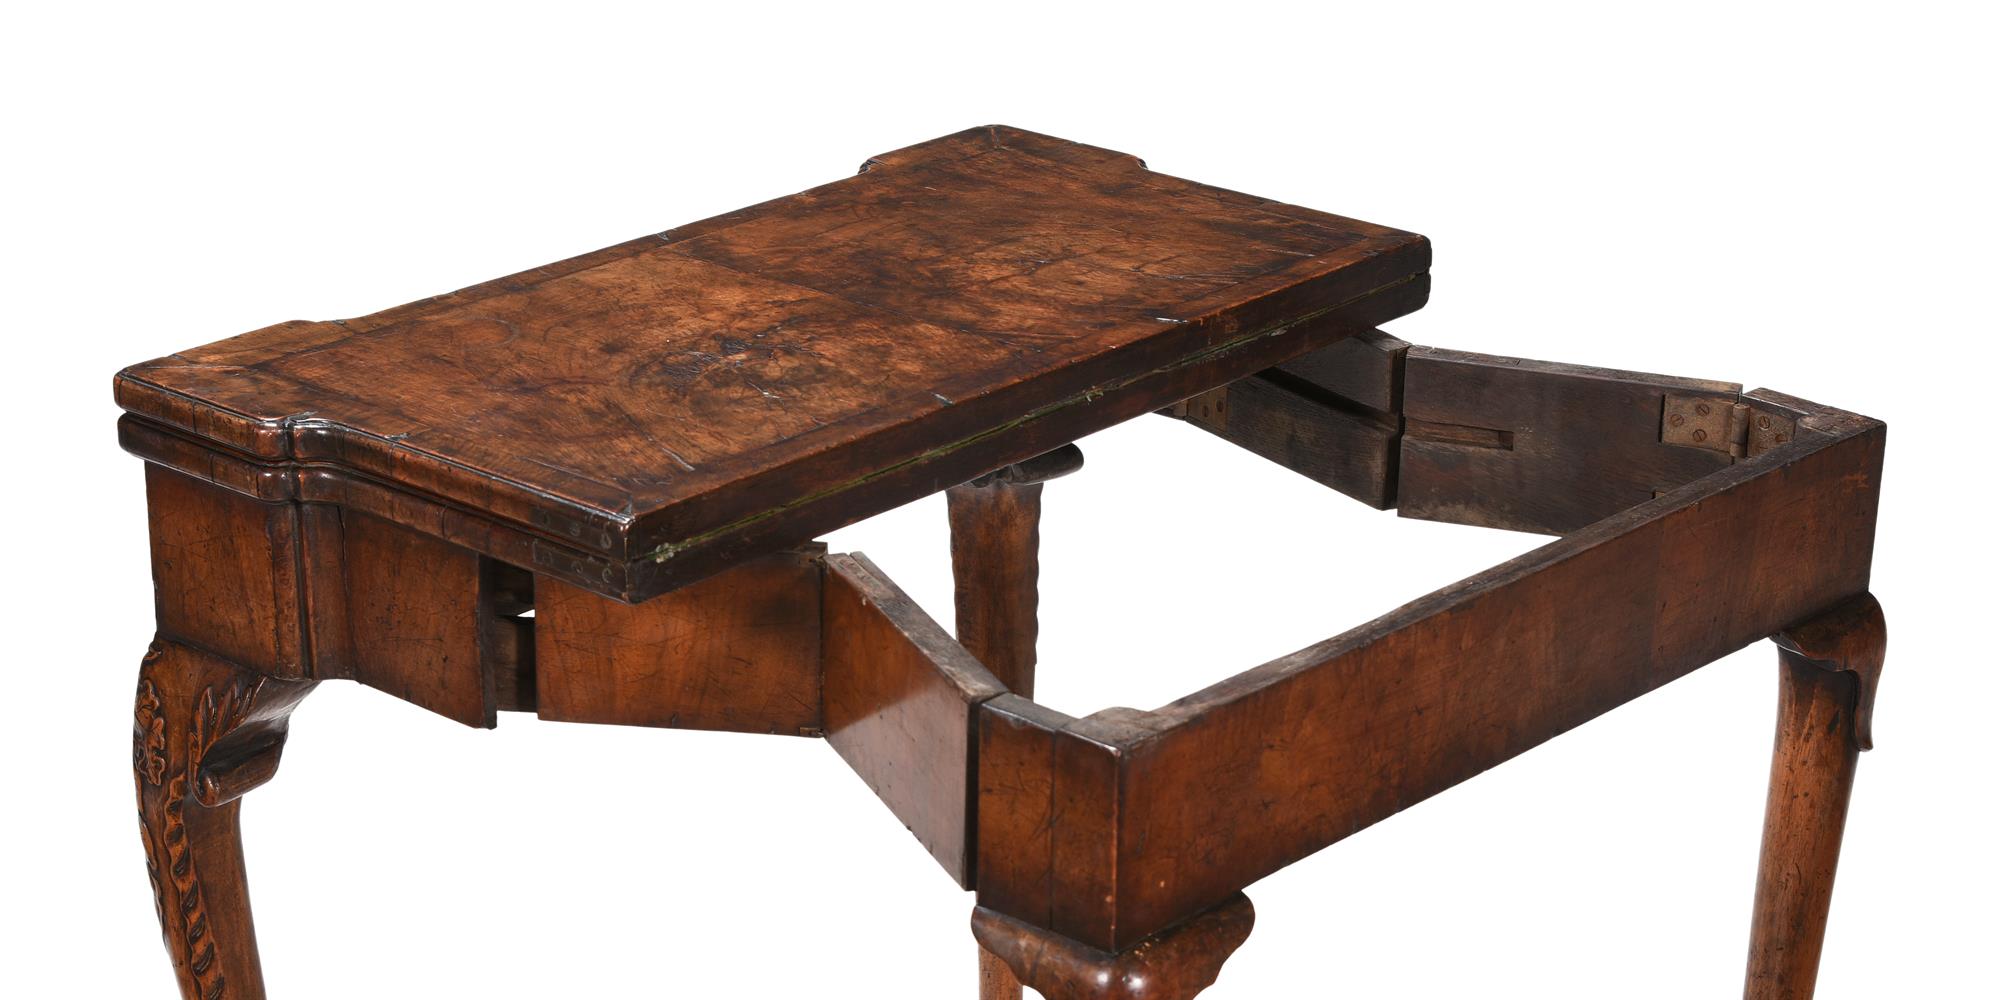 A GEORGE II WALNUT AND CROSSBANDED CONCERTINA ACTION CARD TABLE, MID 18TH CENTURY - Image 4 of 4